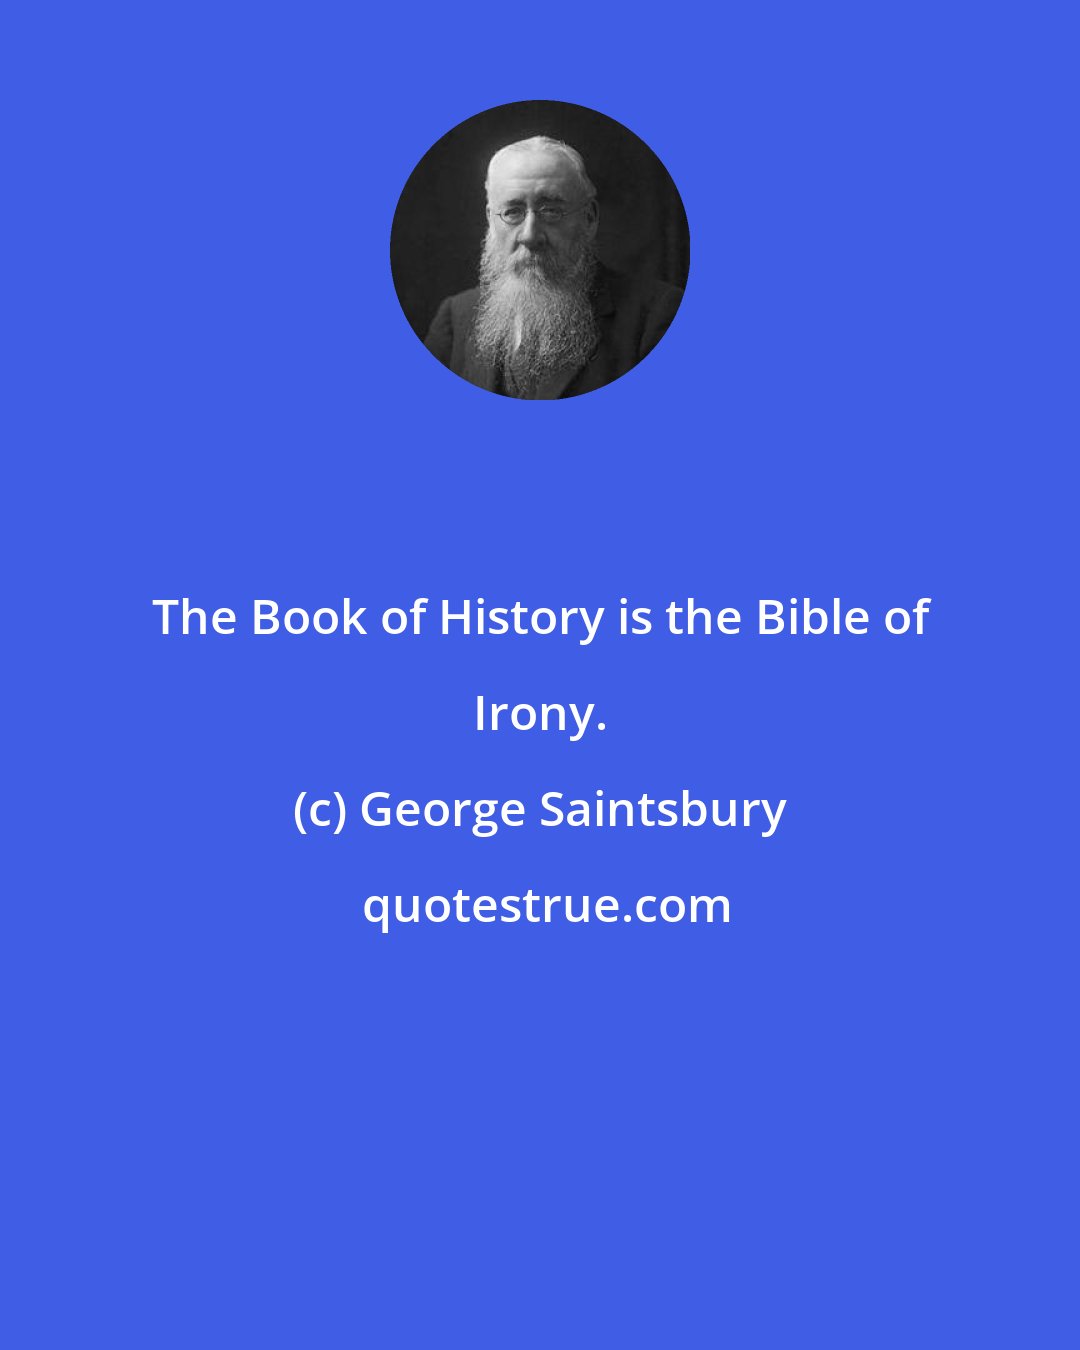 George Saintsbury: The Book of History is the Bible of Irony.